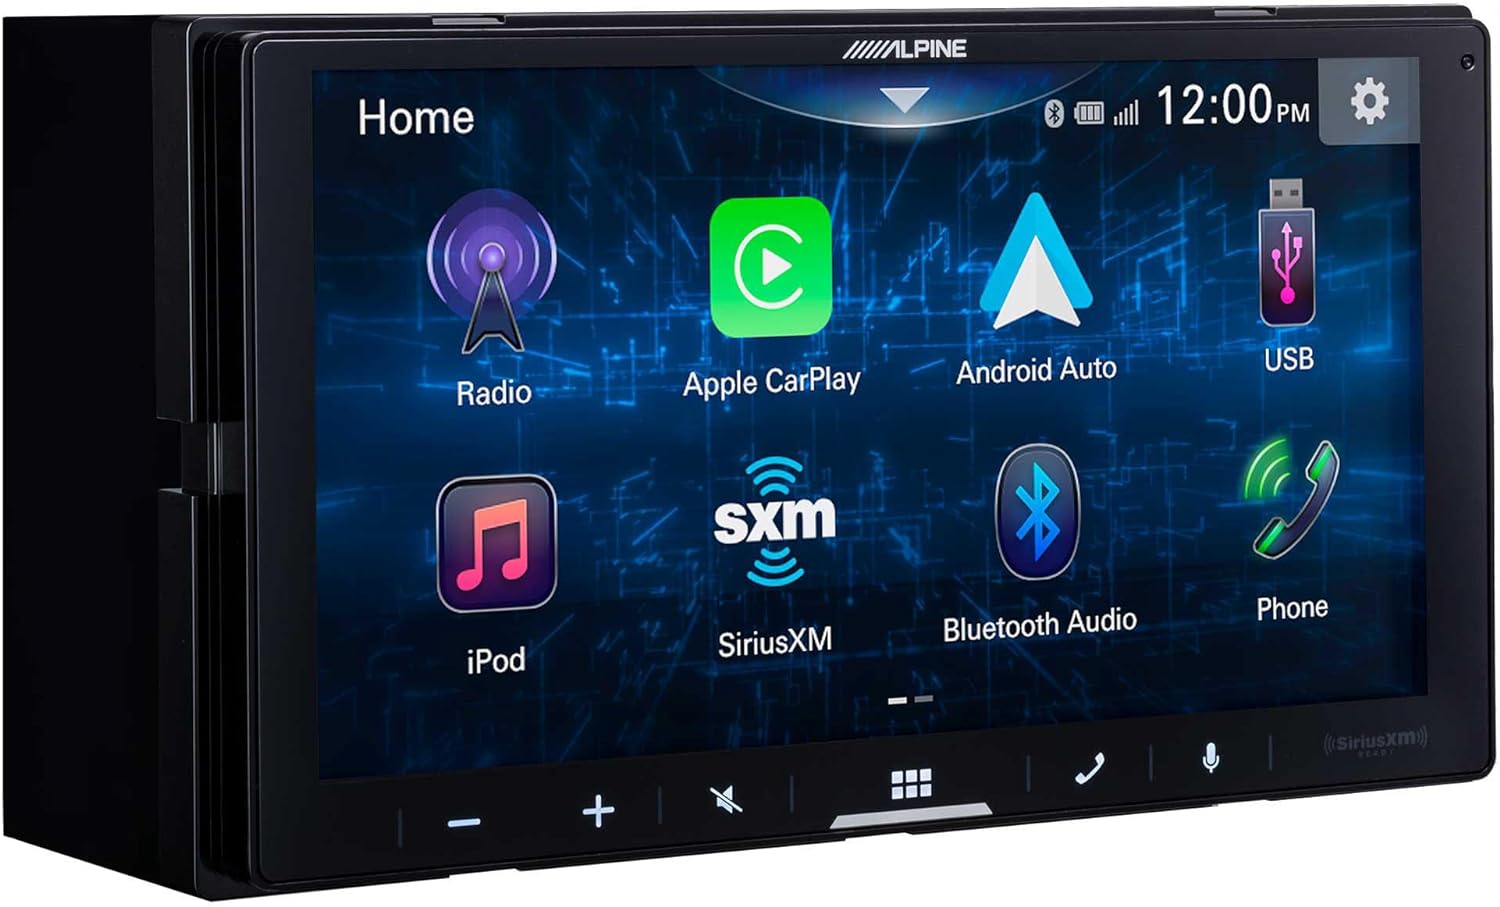 Alpine iLX-W670 7" Mechless Bluetooth Car Receiver Deck with Sirius Tuner and Voxx HD Wide Angle Backup Camera Bundle. Android and iPhone Bluetooth Integration for Android Auto and Apple Car Play